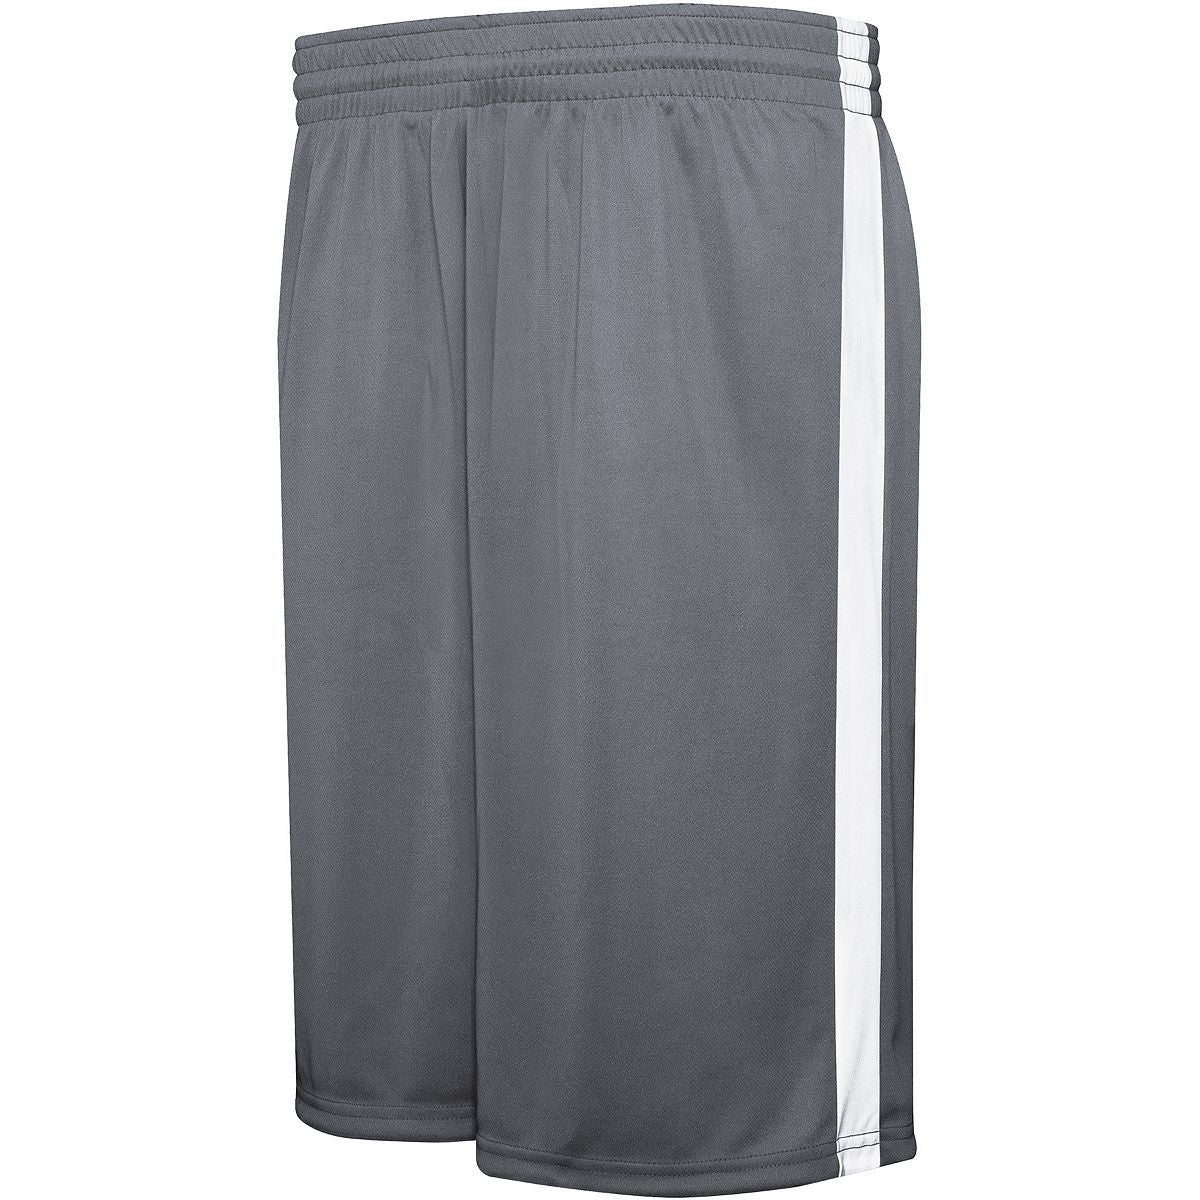 Augusta Sportswear Competition Reversible Shorts in Graphite/White  -Part of the Adult, Adult-Shorts, Augusta-Products, Basketball, All-Sports, All-Sports-1 product lines at KanaleyCreations.com